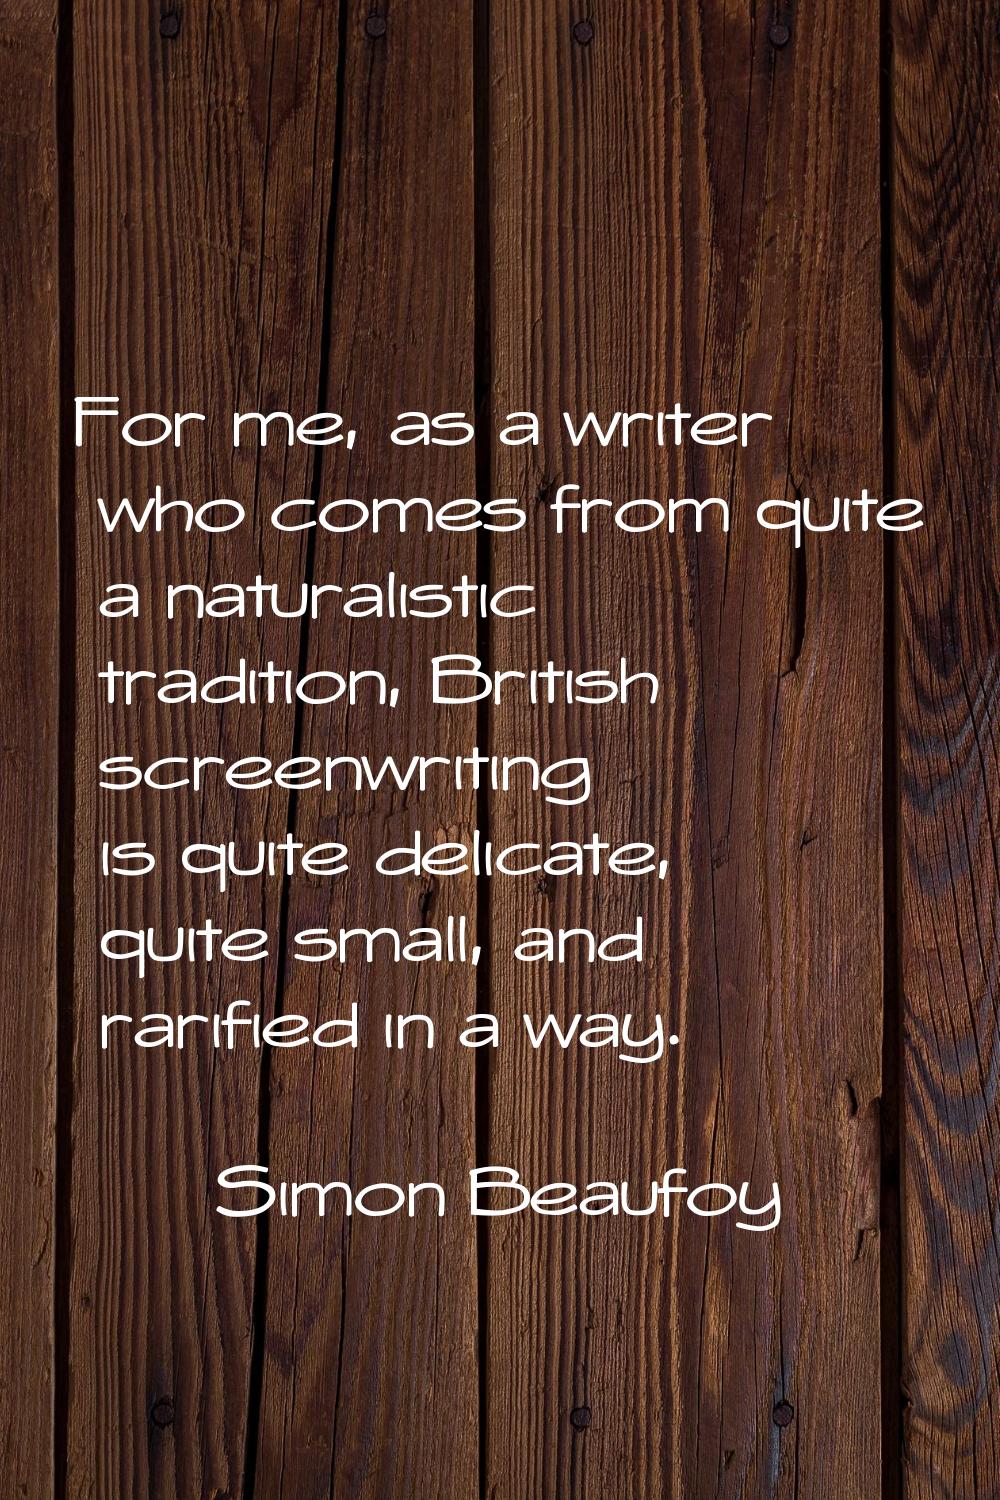 For me, as a writer who comes from quite a naturalistic tradition, British screenwriting is quite d